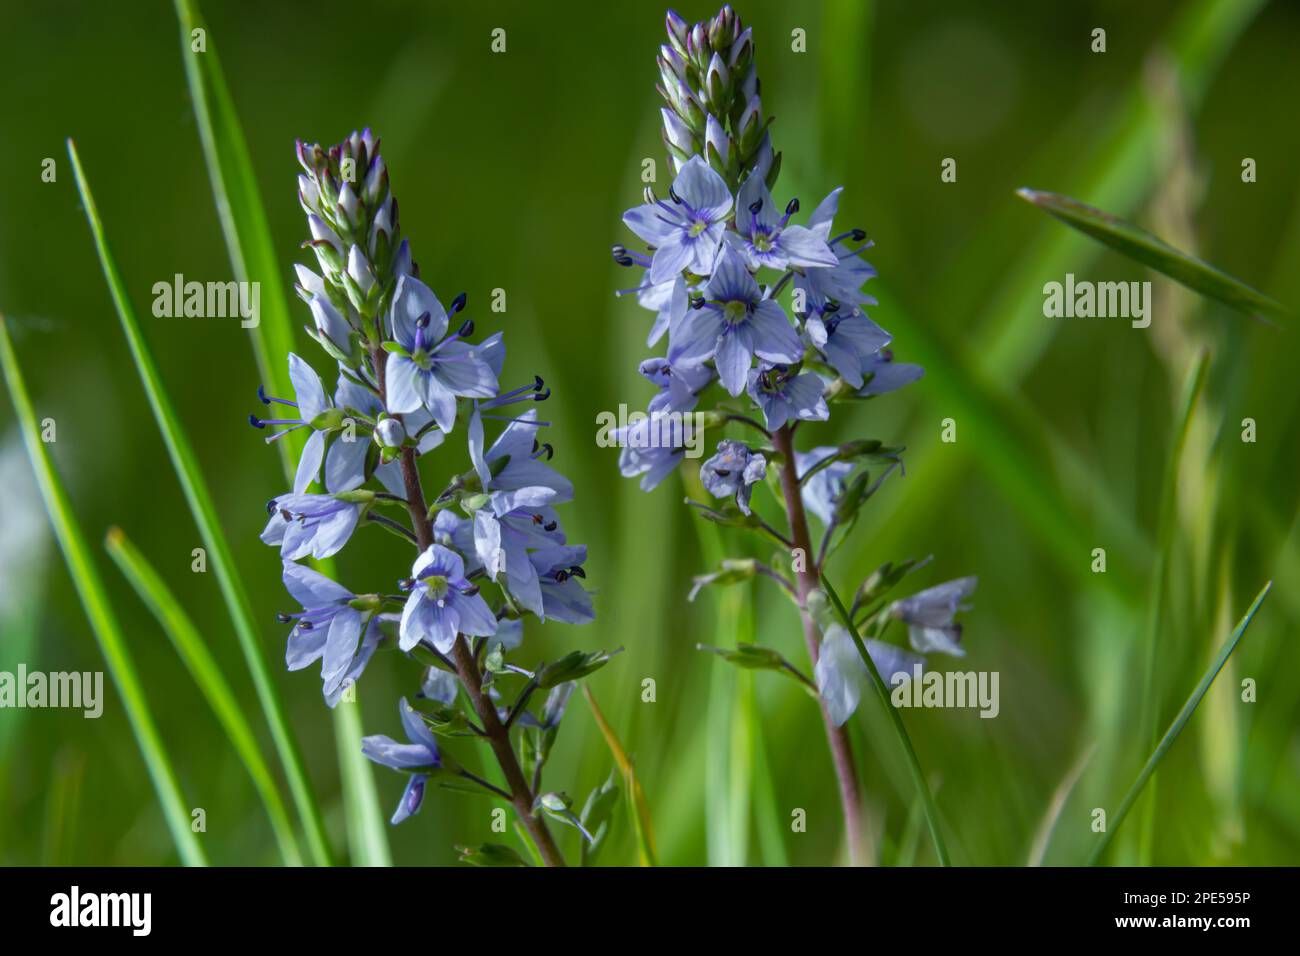 In the spring, Veronica prostrata blooms in the wild among grasses. Stock Photo